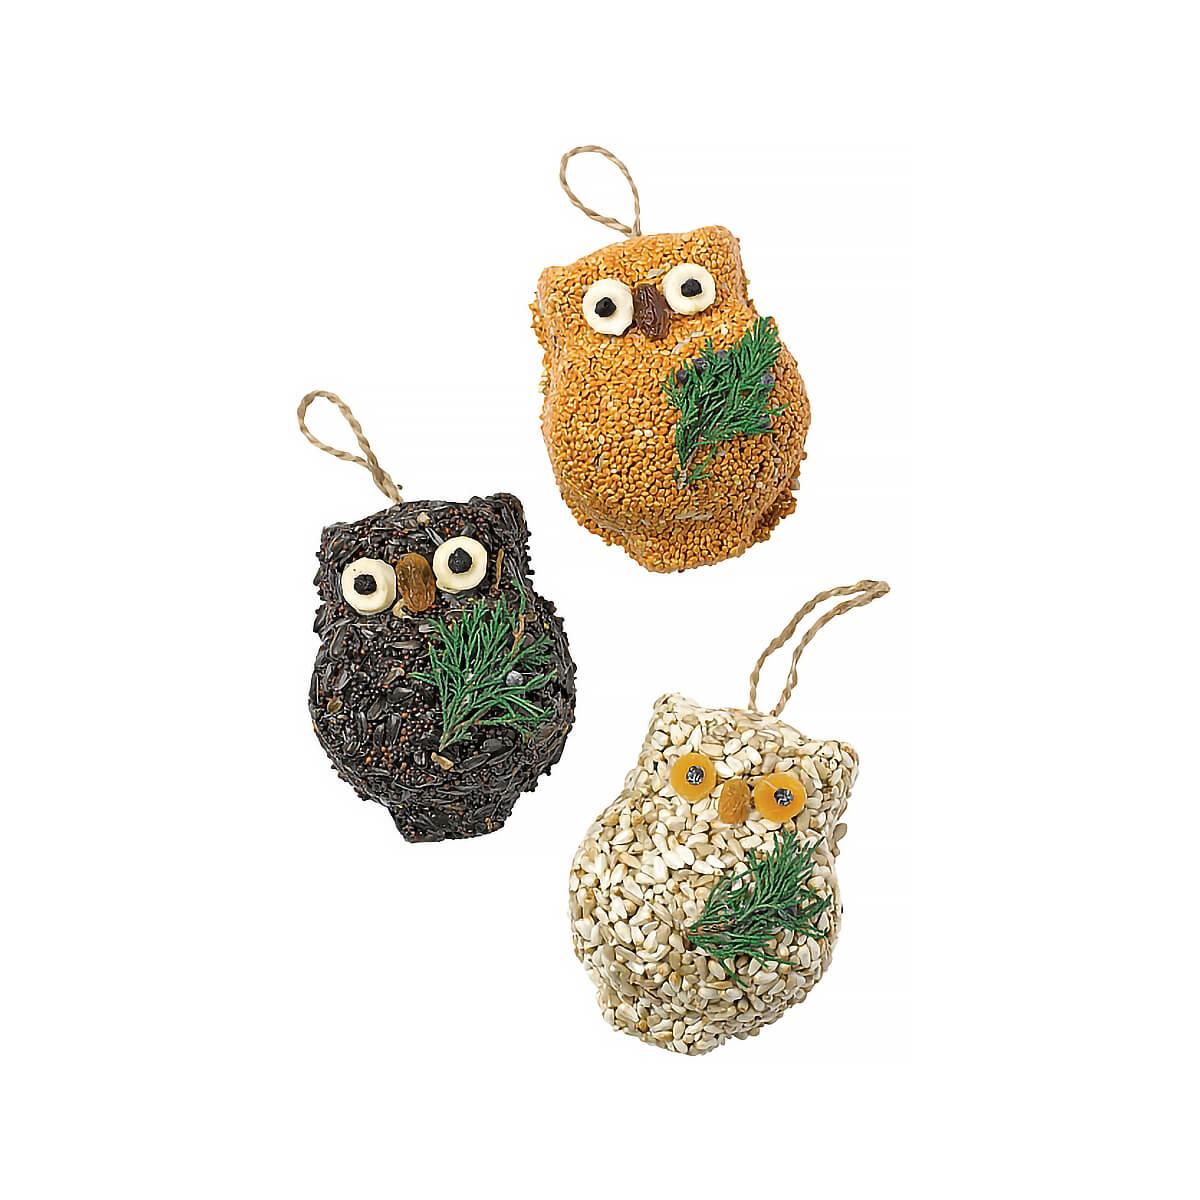  Ollie The Owl Ornament - 3 Pack